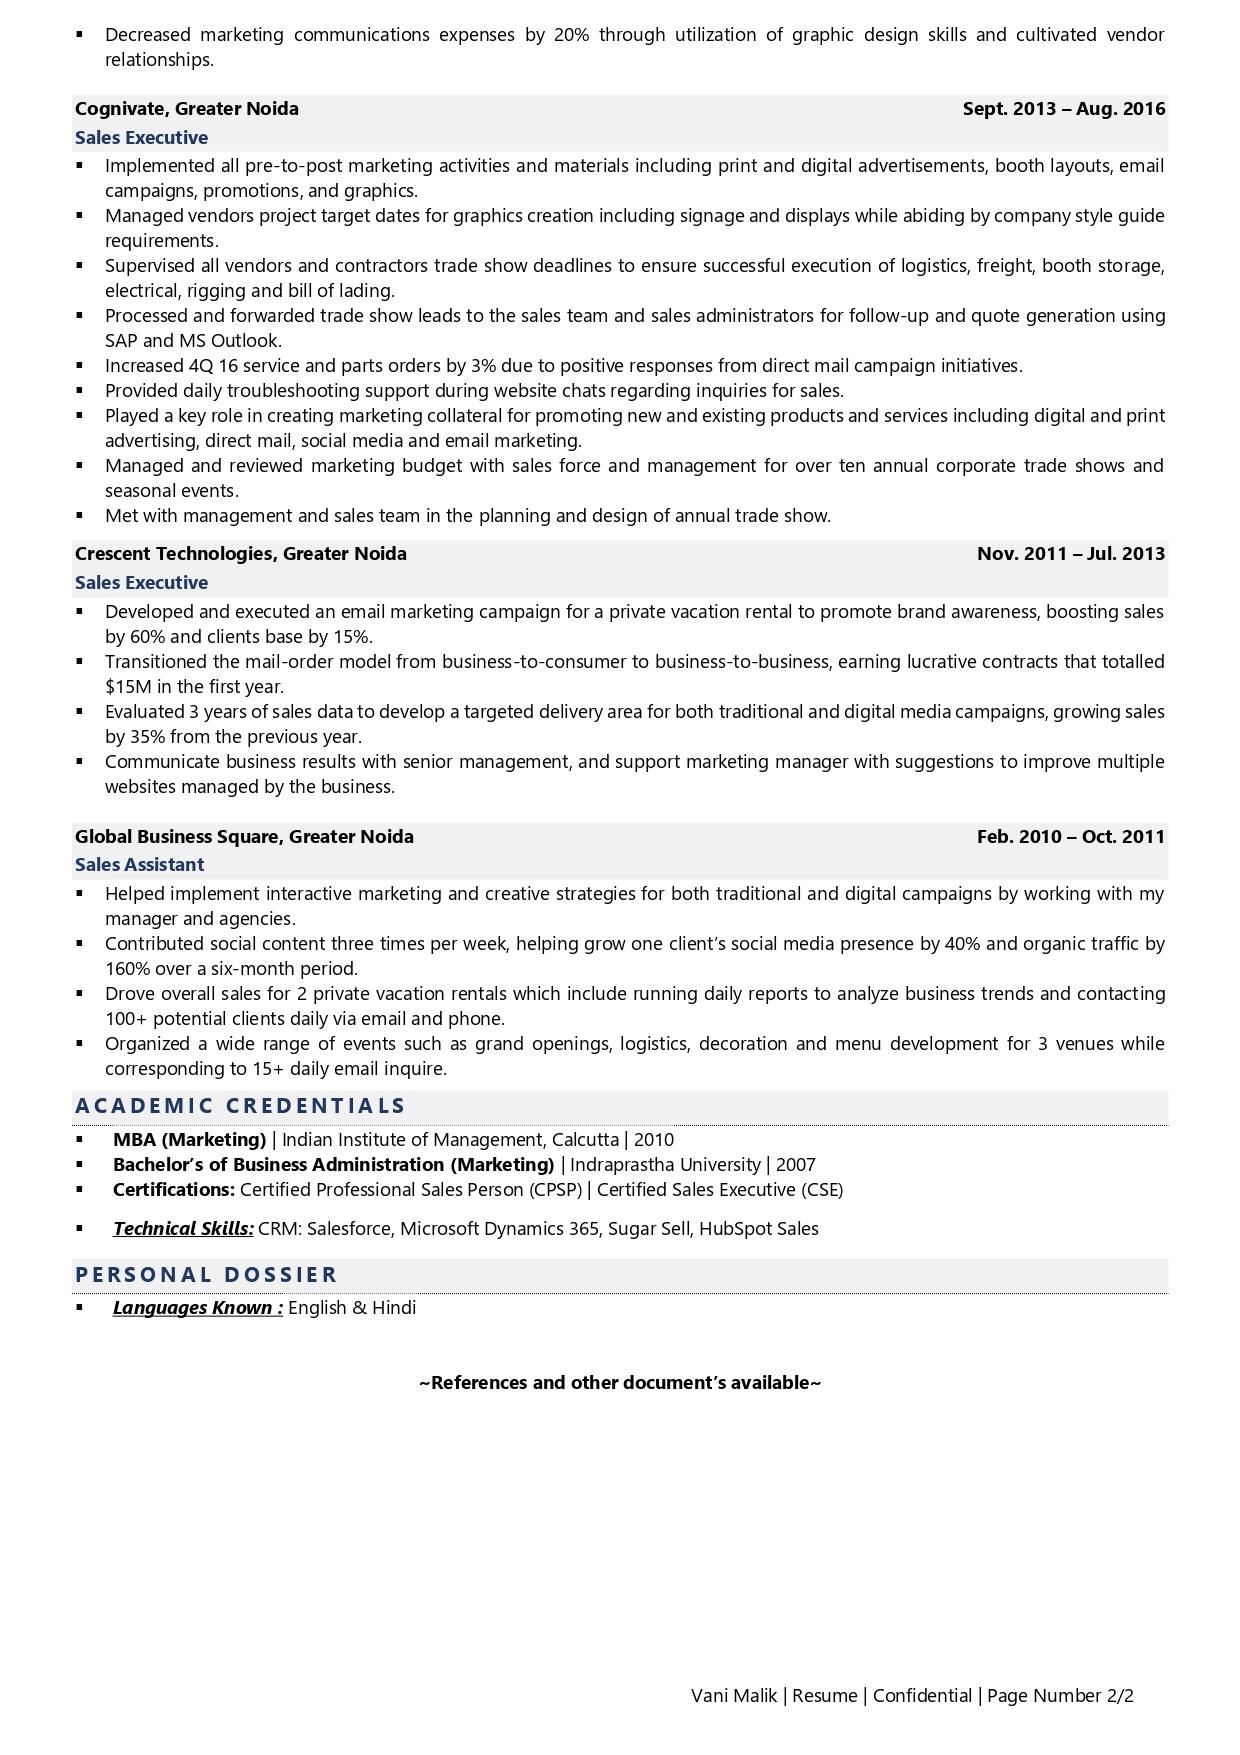 Sales Manager - Resume Example & Template